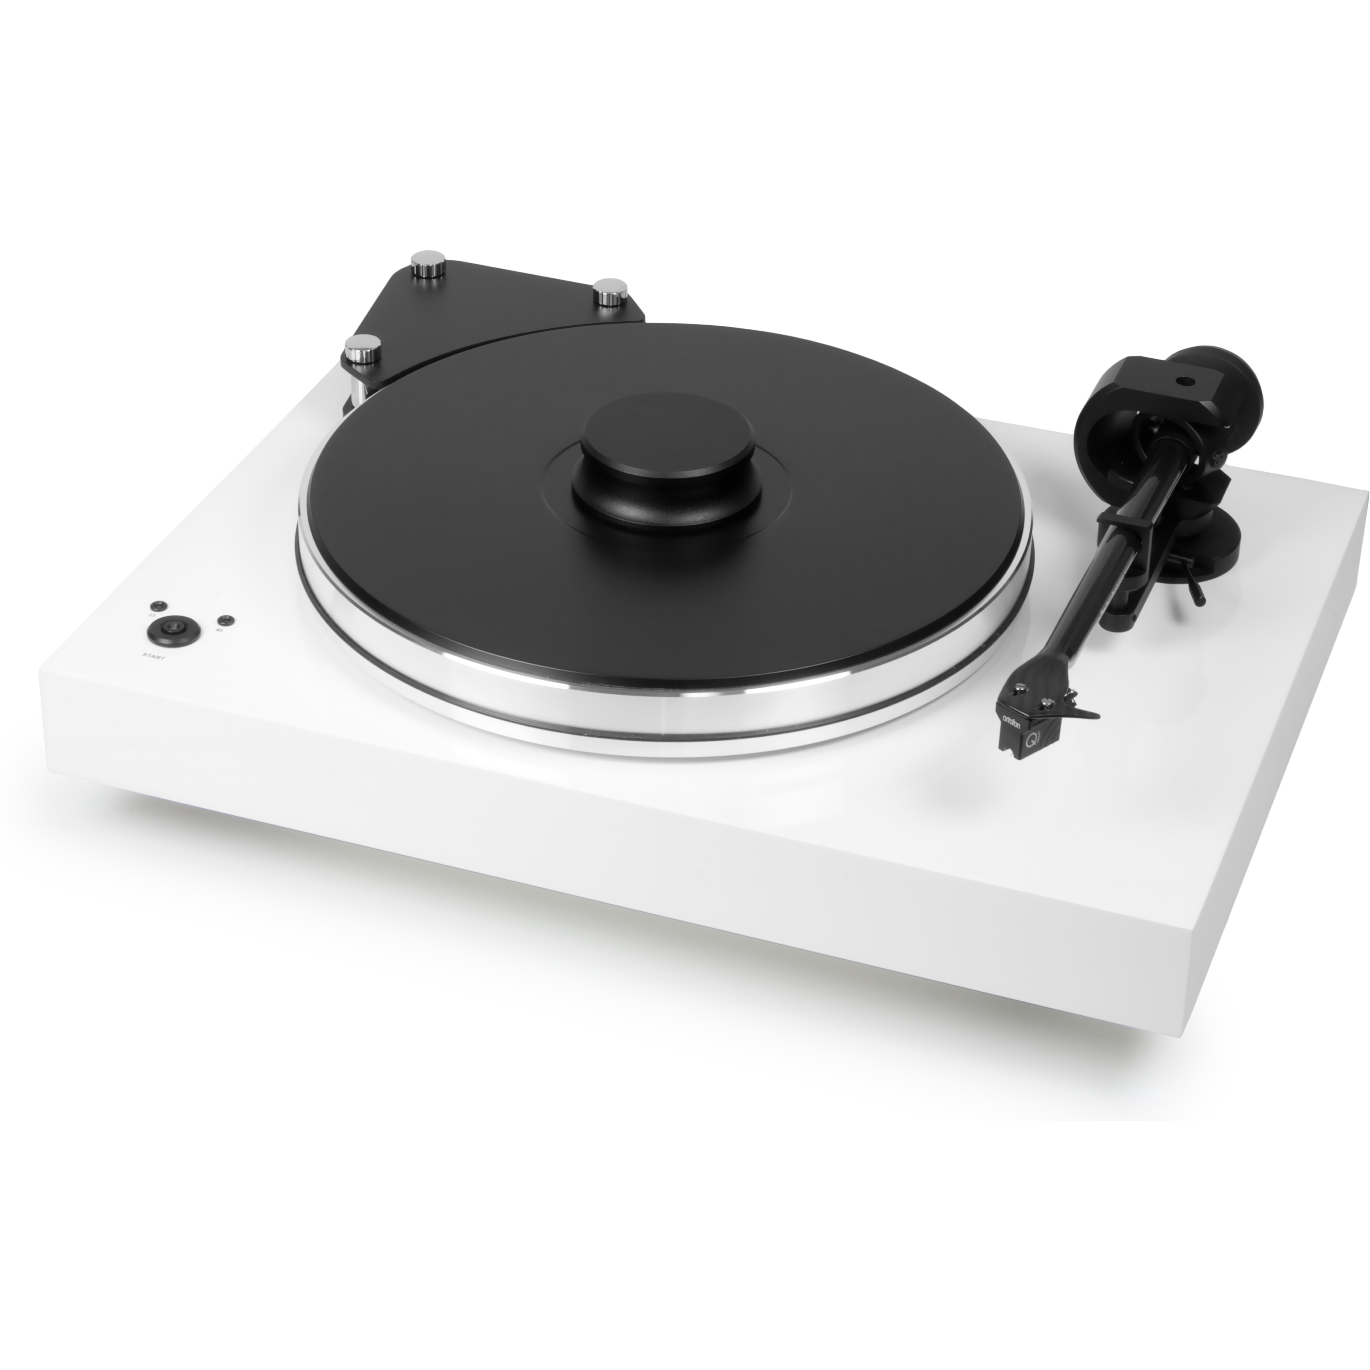 Pro-Ject Xtension 9 SuperPack Turntable